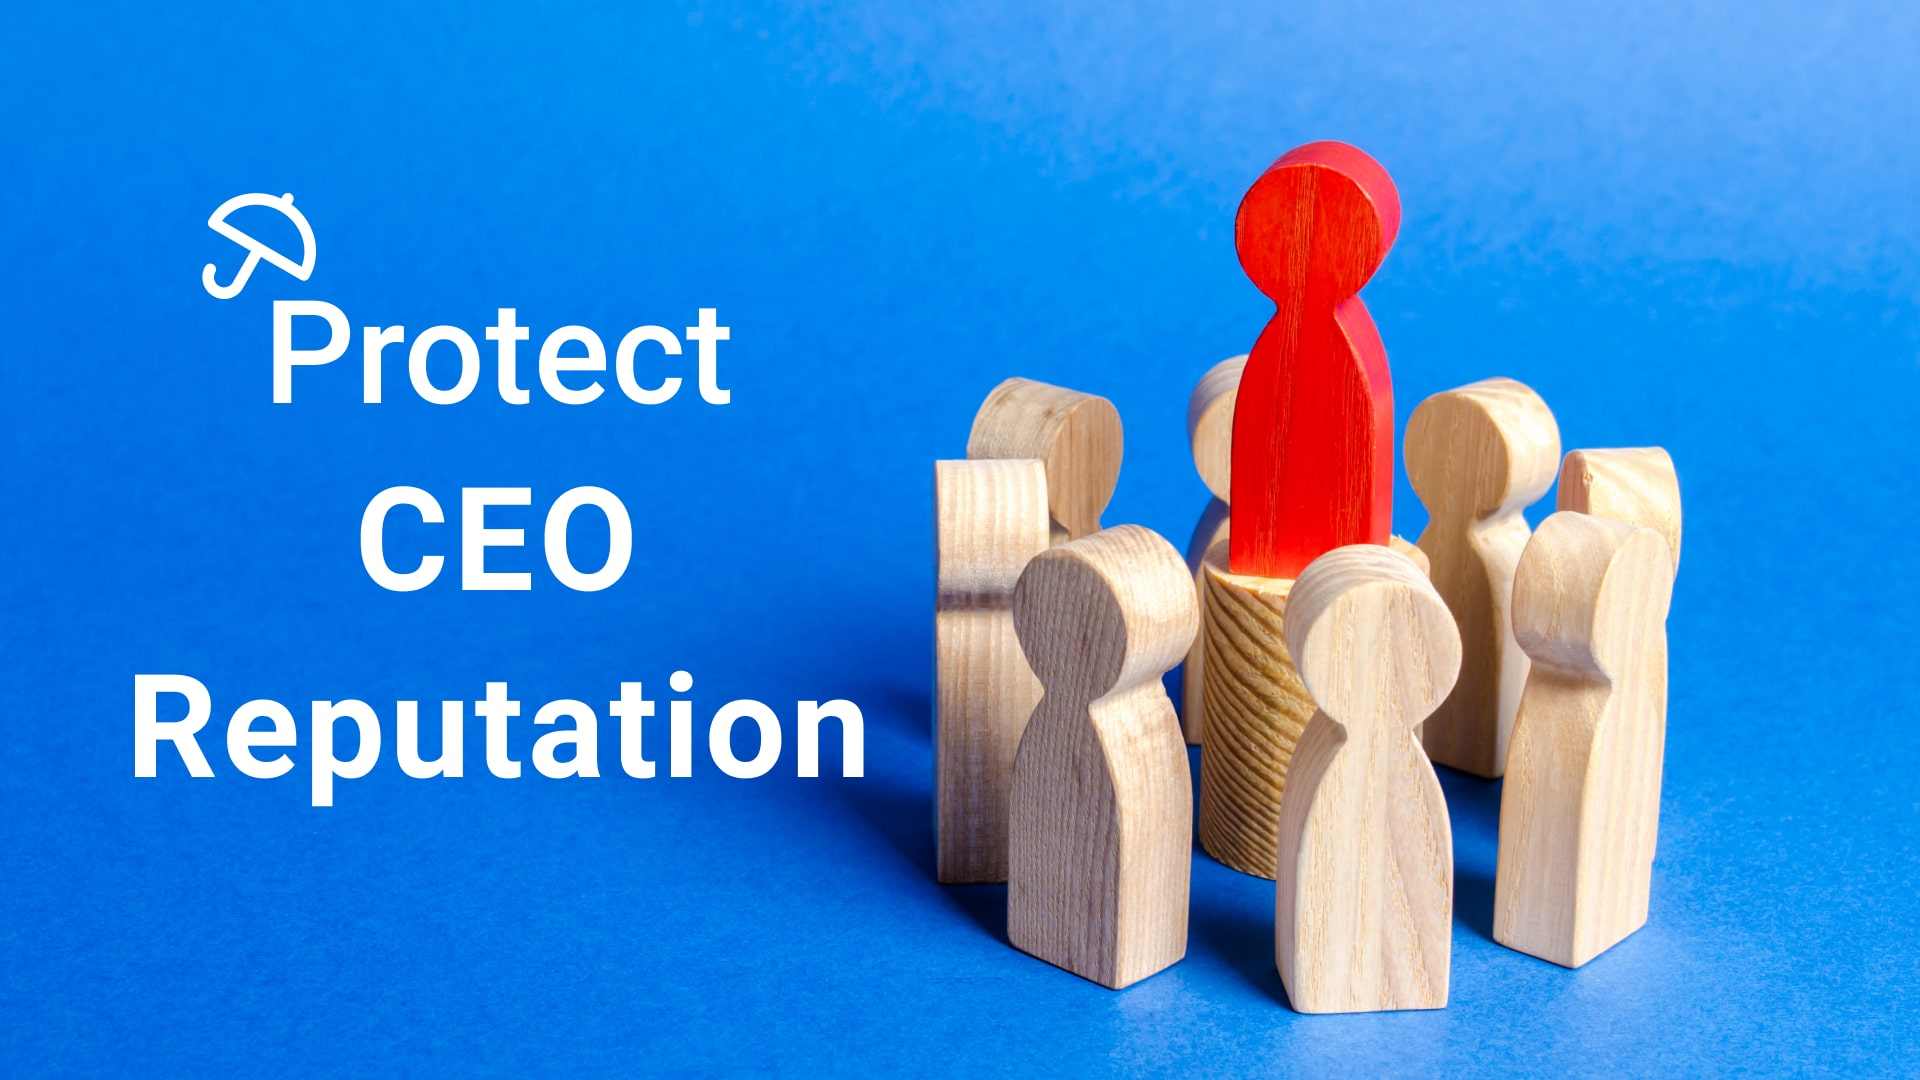 Case Study: Helping CEOs Protect and Rebuild Their Reputation